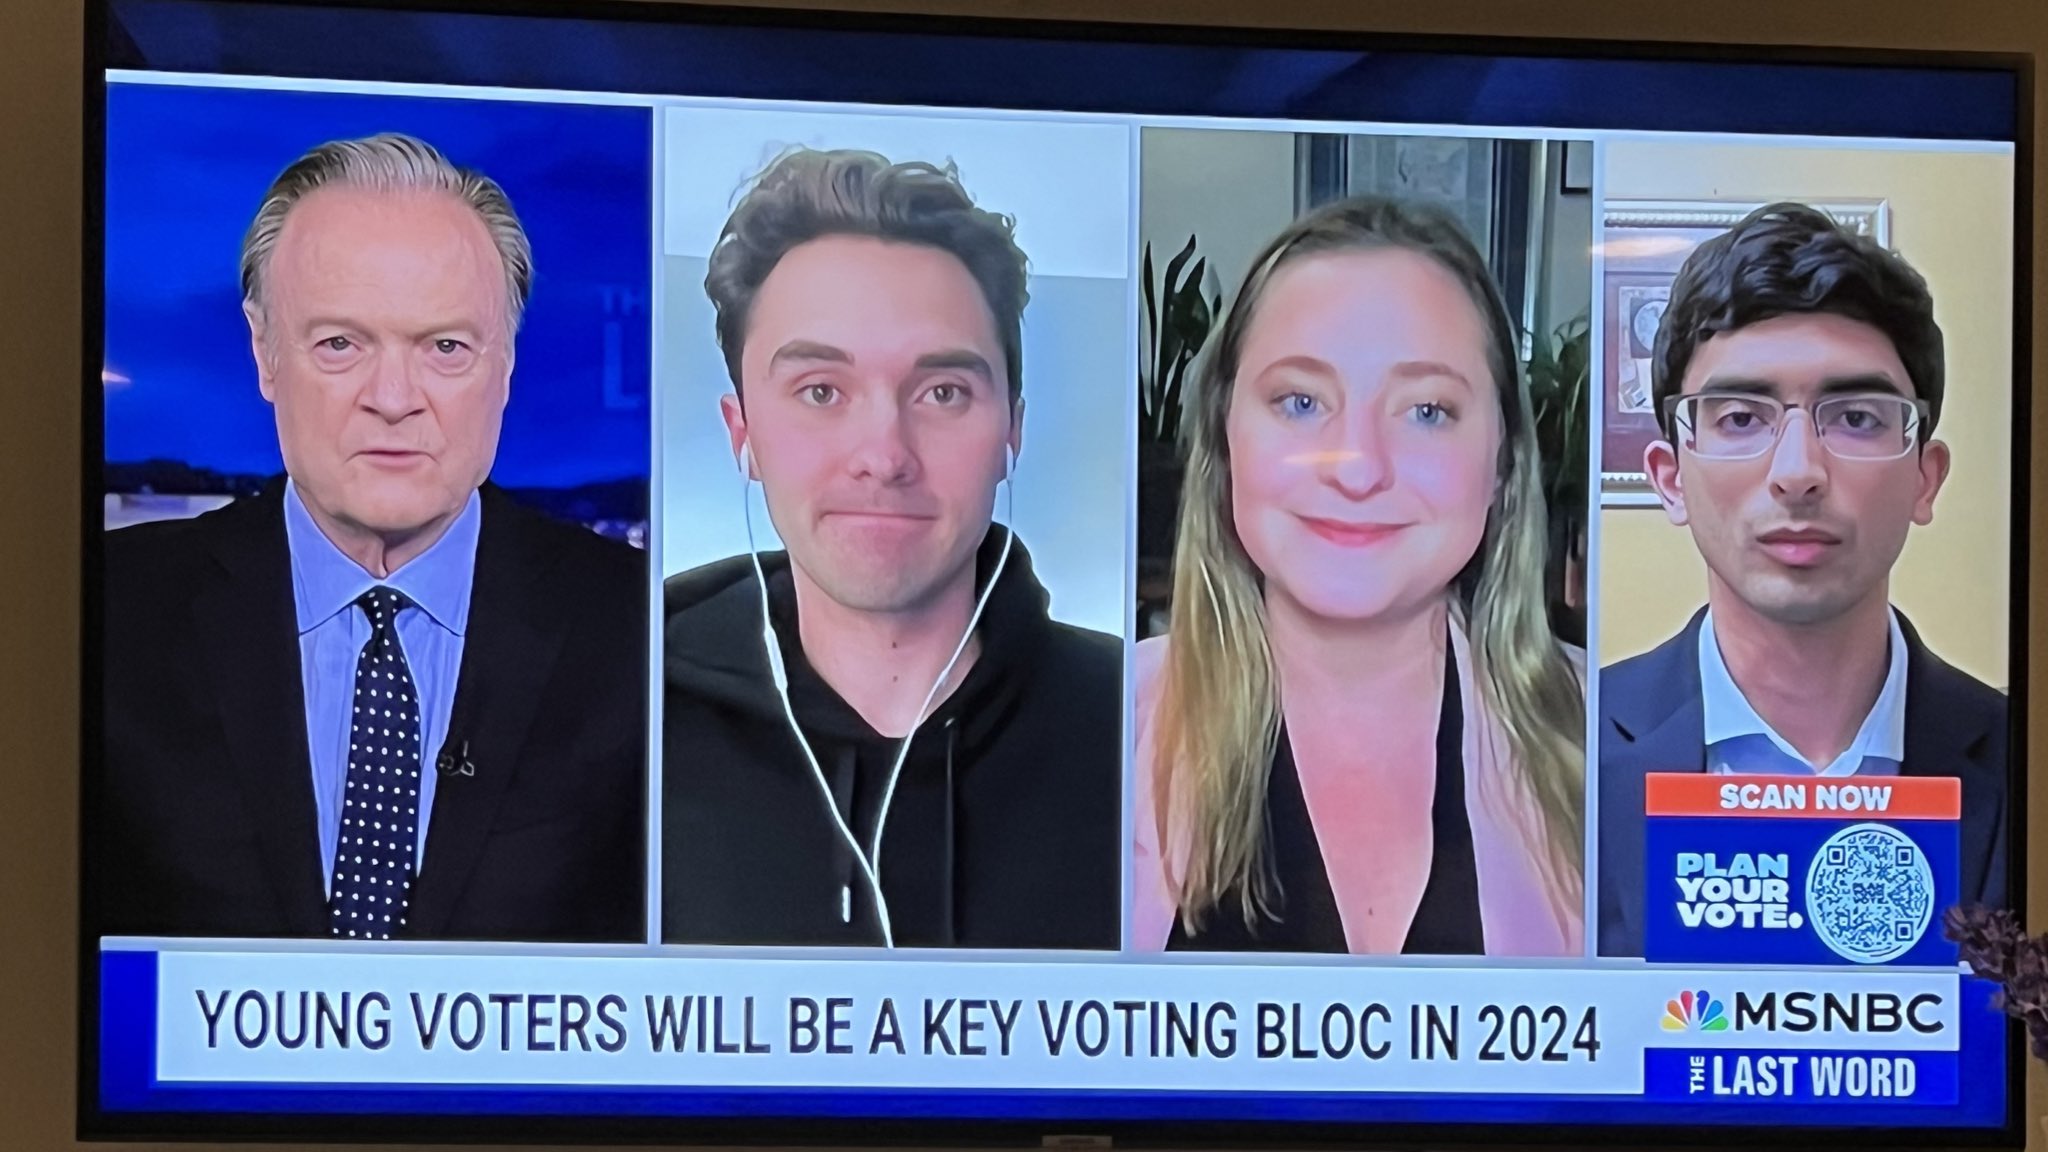 David Hogg appearing on MSNBC with Christine and Ashwin 